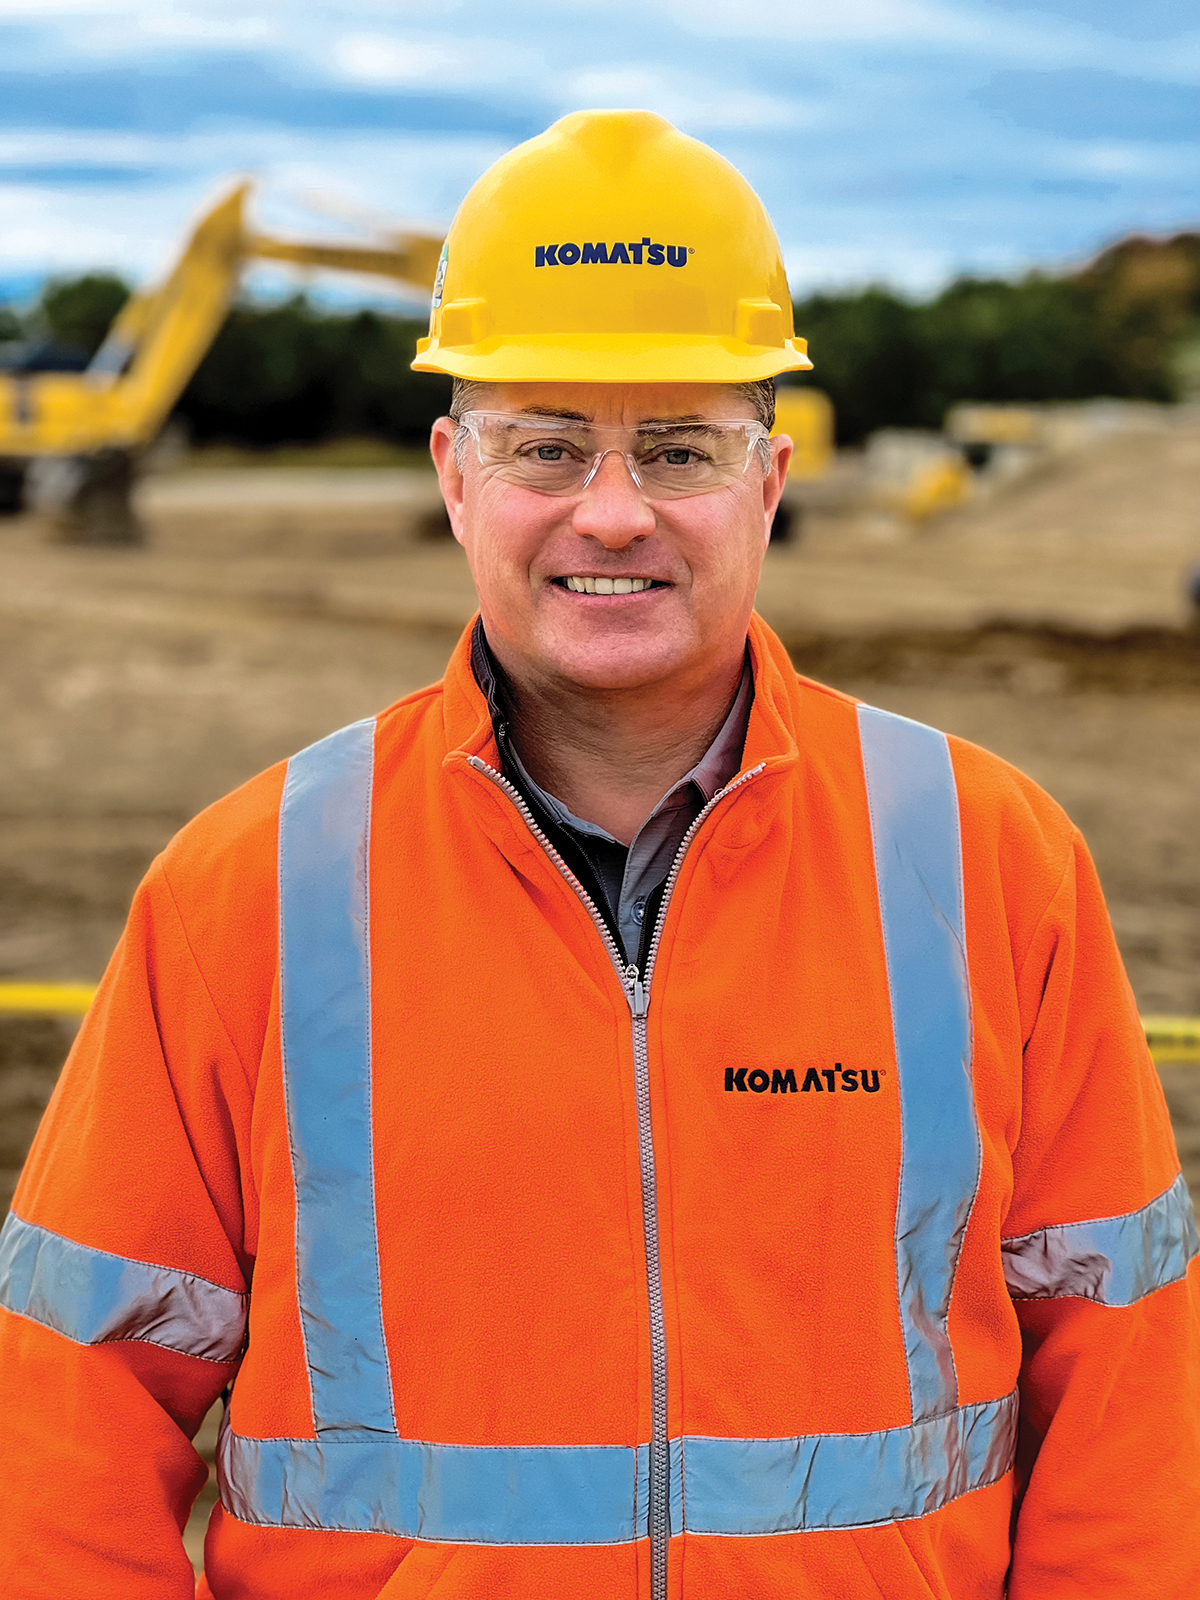 An image of Bruce Boebel, Director of Product and Services for Wheeled Products in North America, Komatsu